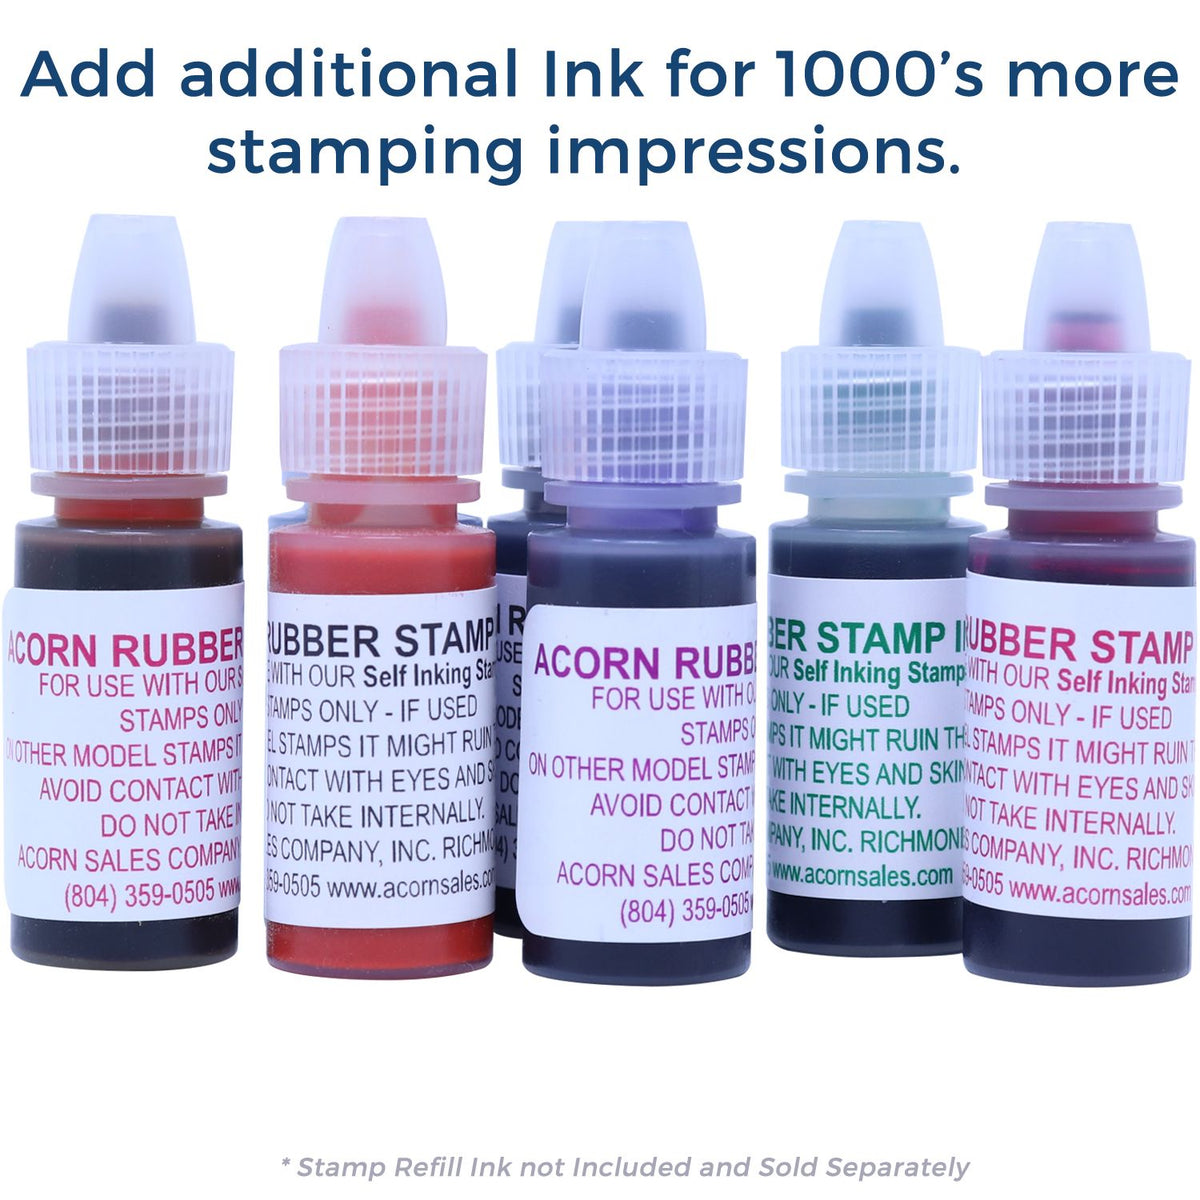 Refill Ink for Self-Inking Round Angry Smiley Stamp Available